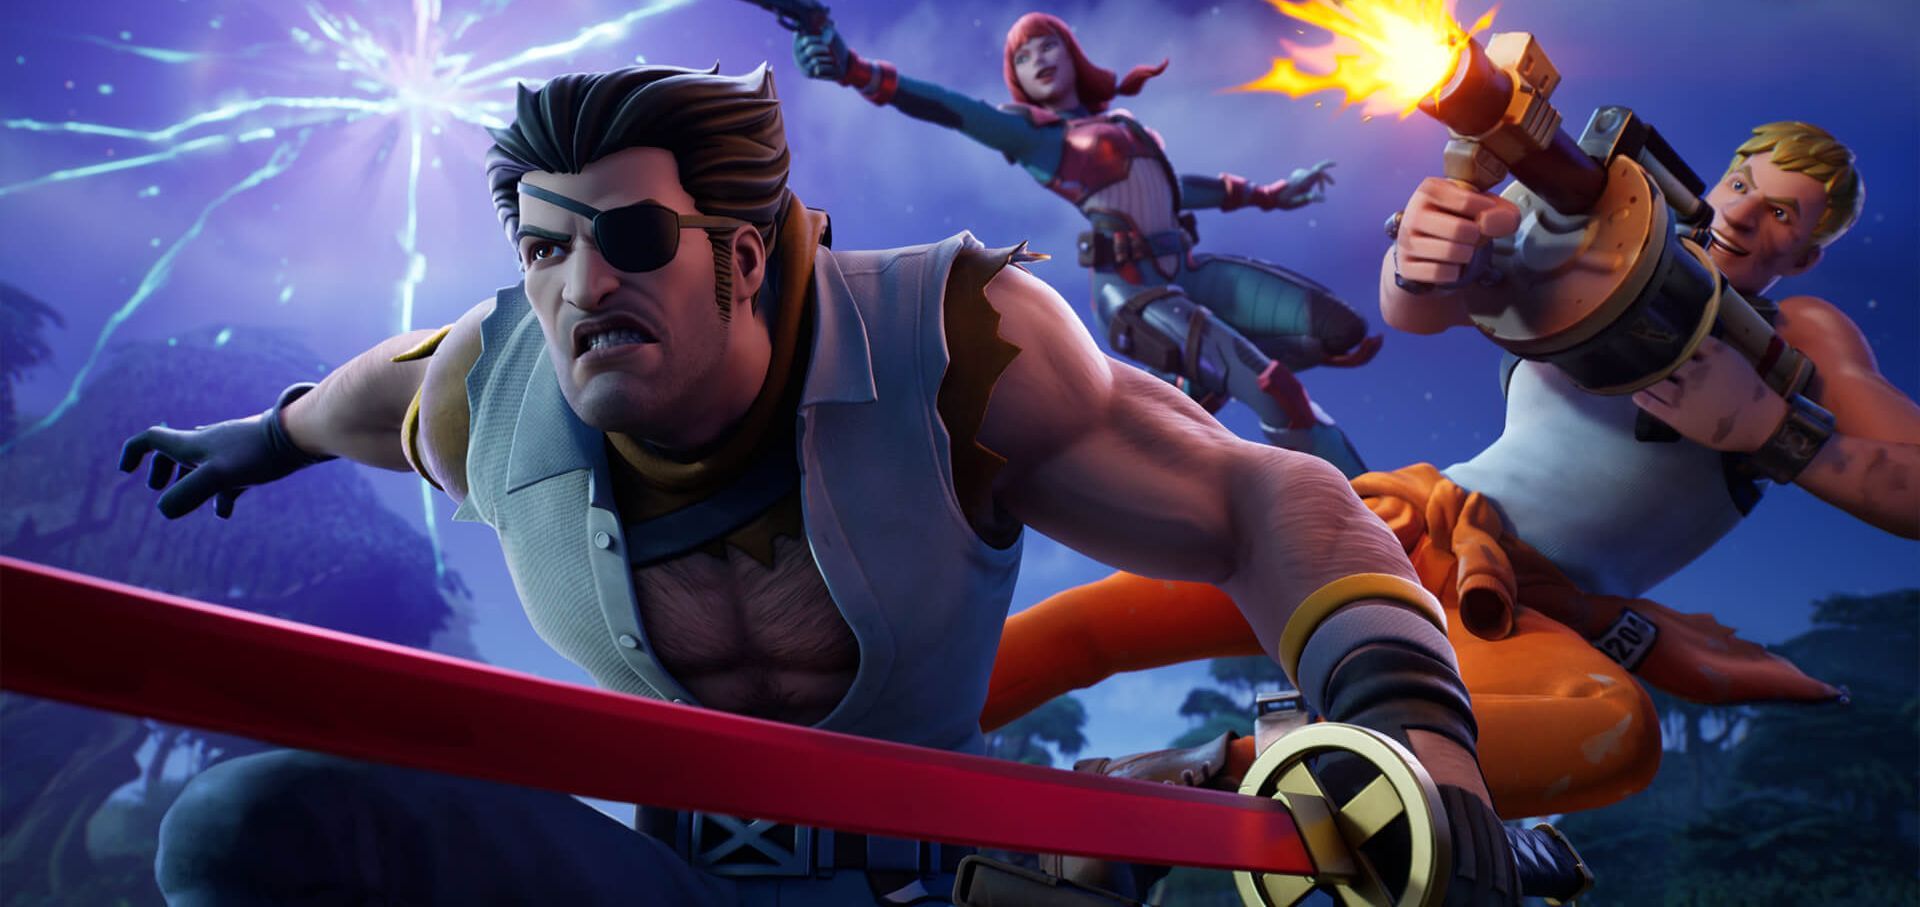 In this article, we are going to be taking a look at the new Wolverine Zero Fortnite skin, which will be added to the game as part of the August Crew Pack.